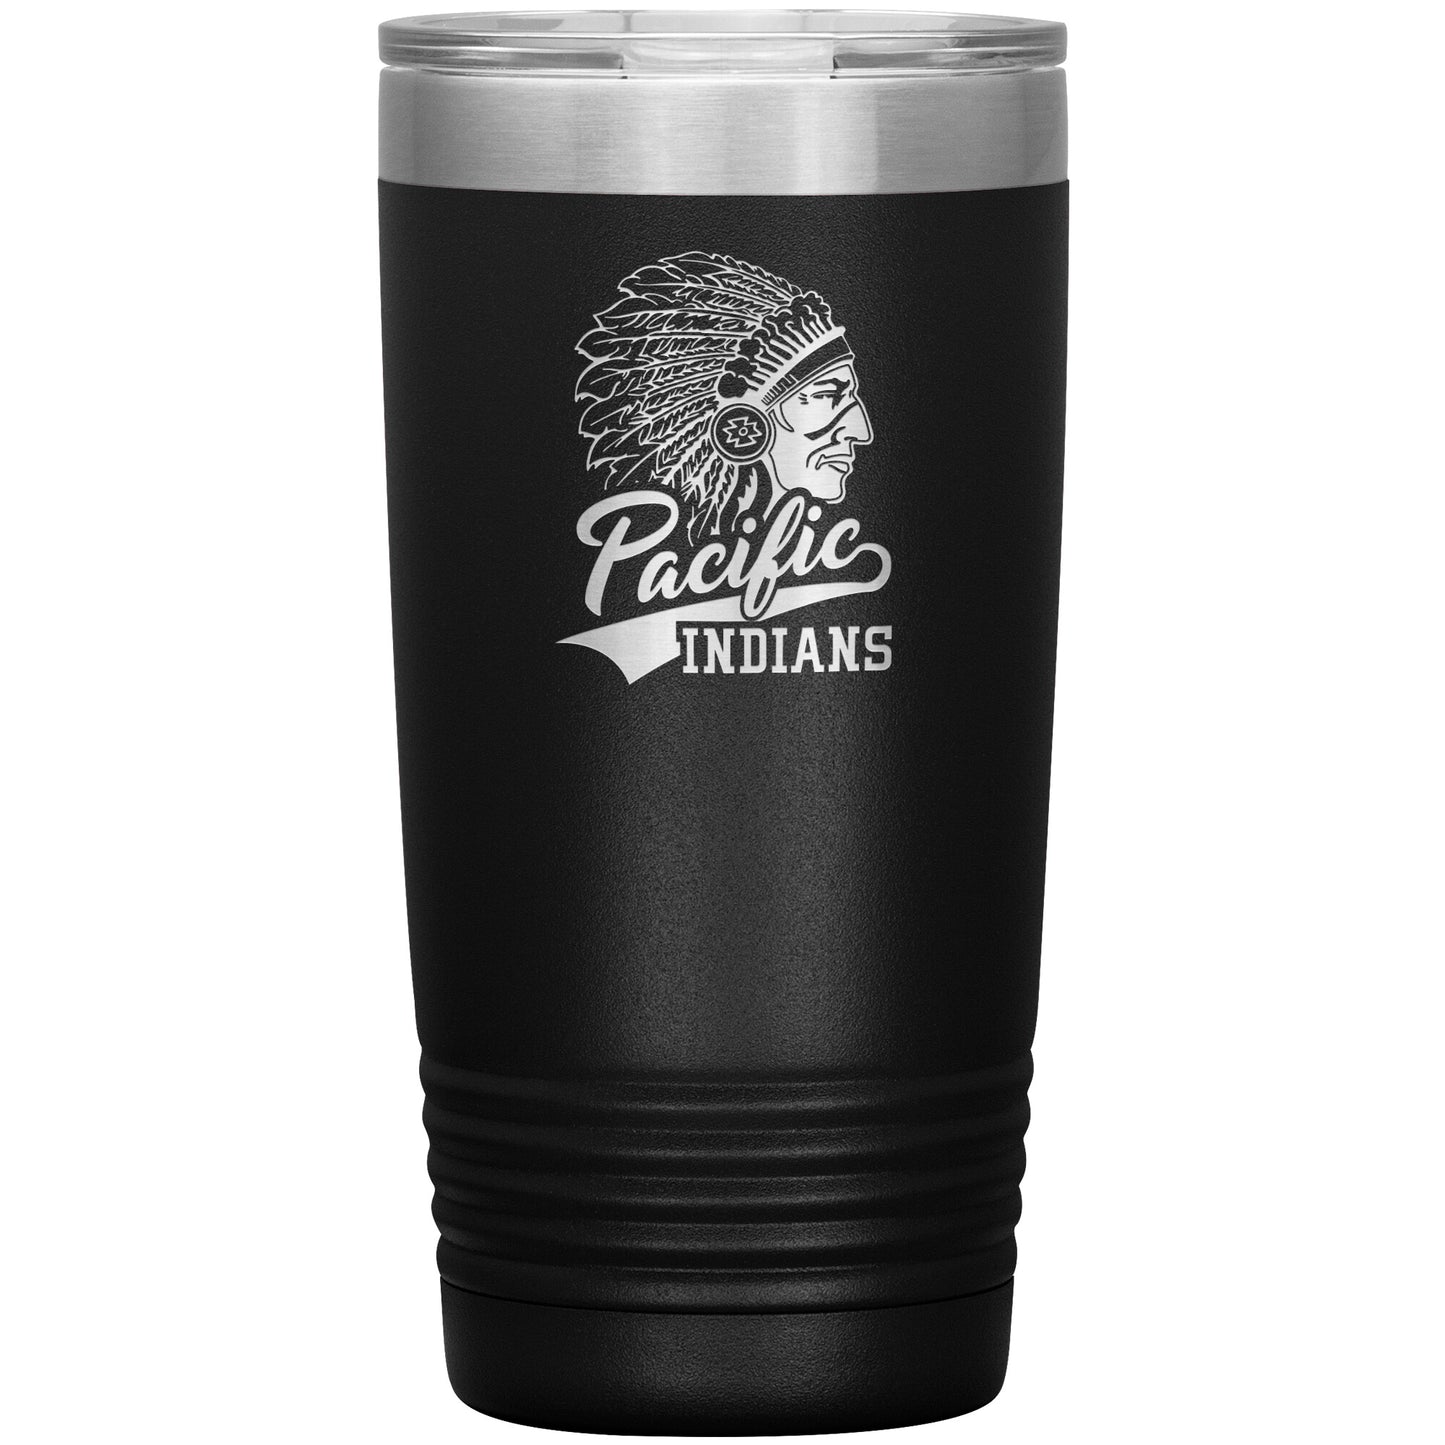 Pacific Indians Design 1 - Insulated Tumblers